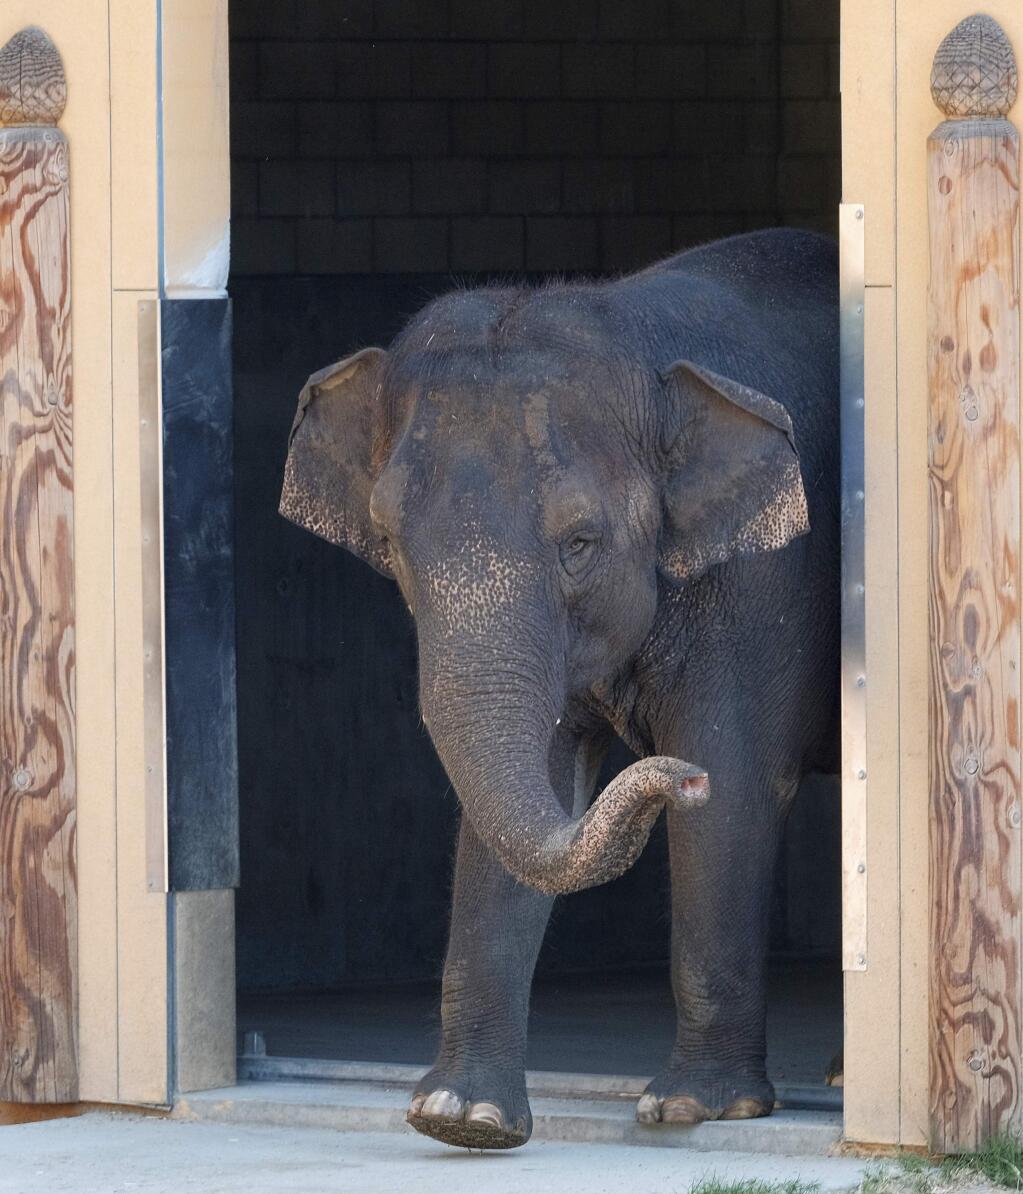 Asian elephant, Shaunzi, the Zoo's newest elephant, makes her first appearance at the Los Angeles Zoo on Thursday, July 6, 2017. The 46-year-old Asian elephant came to Los Angeles from Fresno after its longtime companion died. Shaunzi, who was born in Thailand and spent years in a circus, was introduced to the public this week in the Elephants of Asia exhibit. The pachyderm was trucked 215 miles from Fresno Chaffee Zoo in a special crate last month. (AP Photo/Richard Vogel)